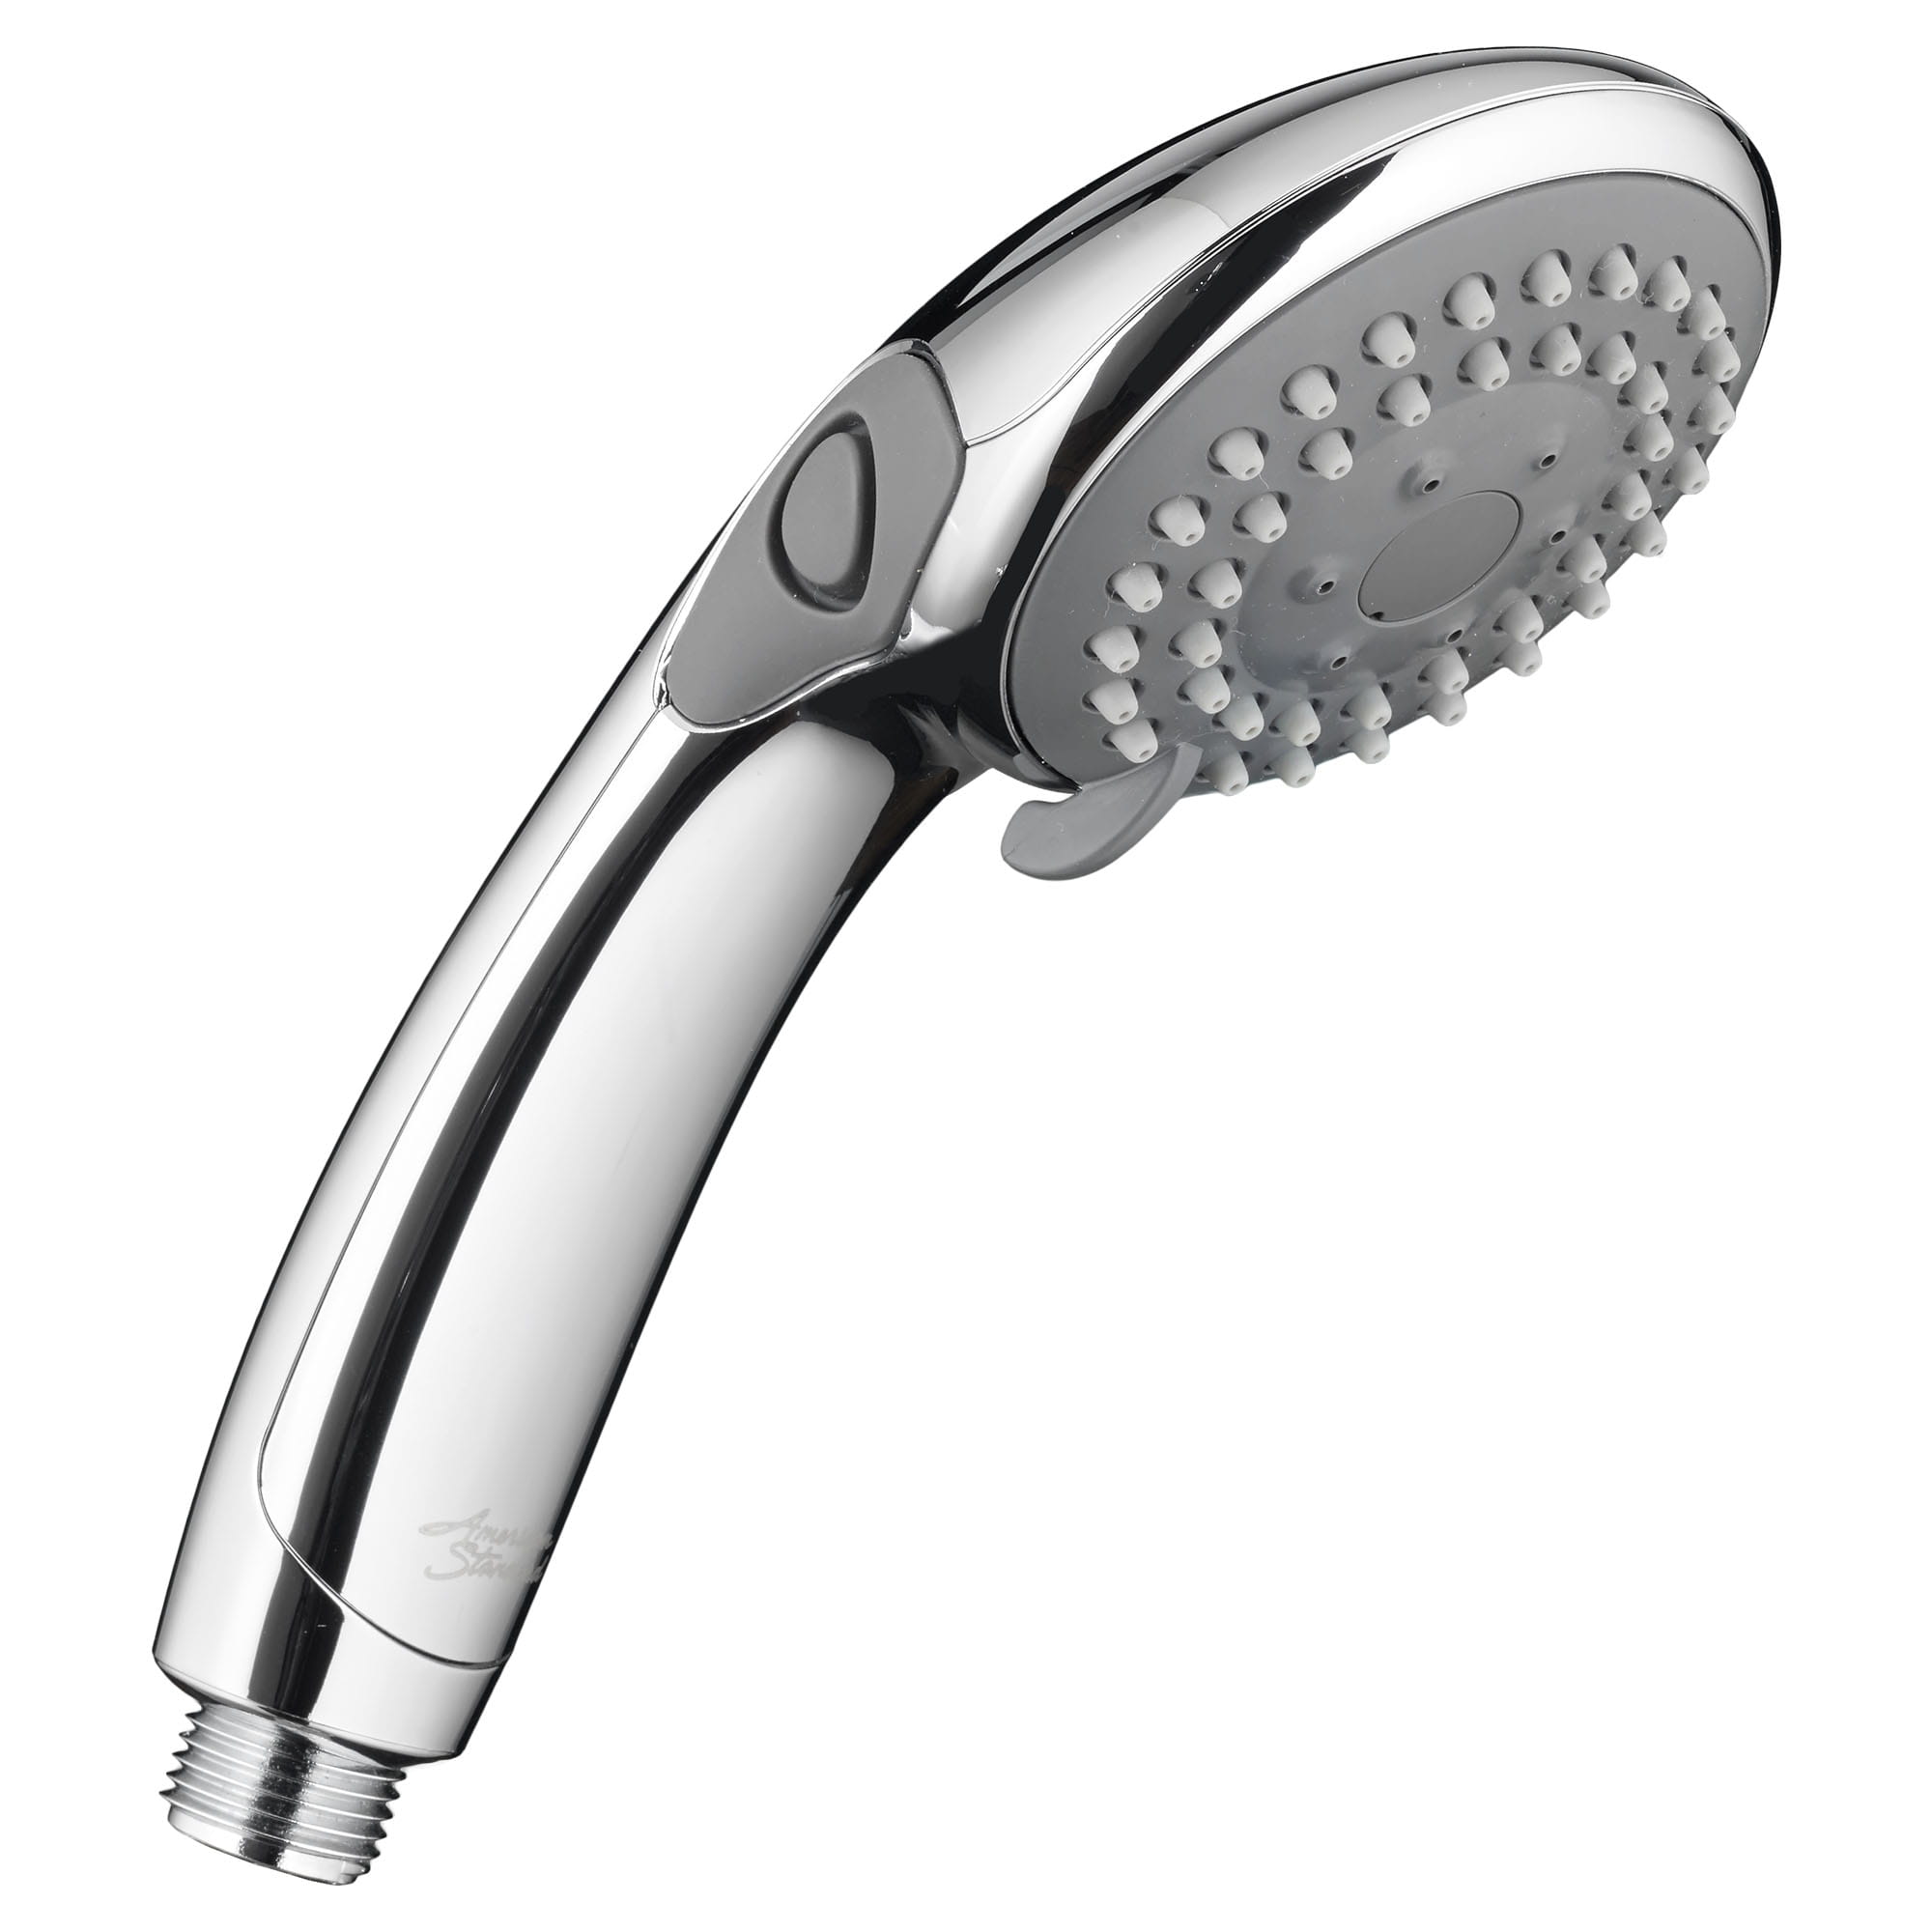 1.5 gpm/5.7 Lpf 3-Function Hand Shower With Pause Feature